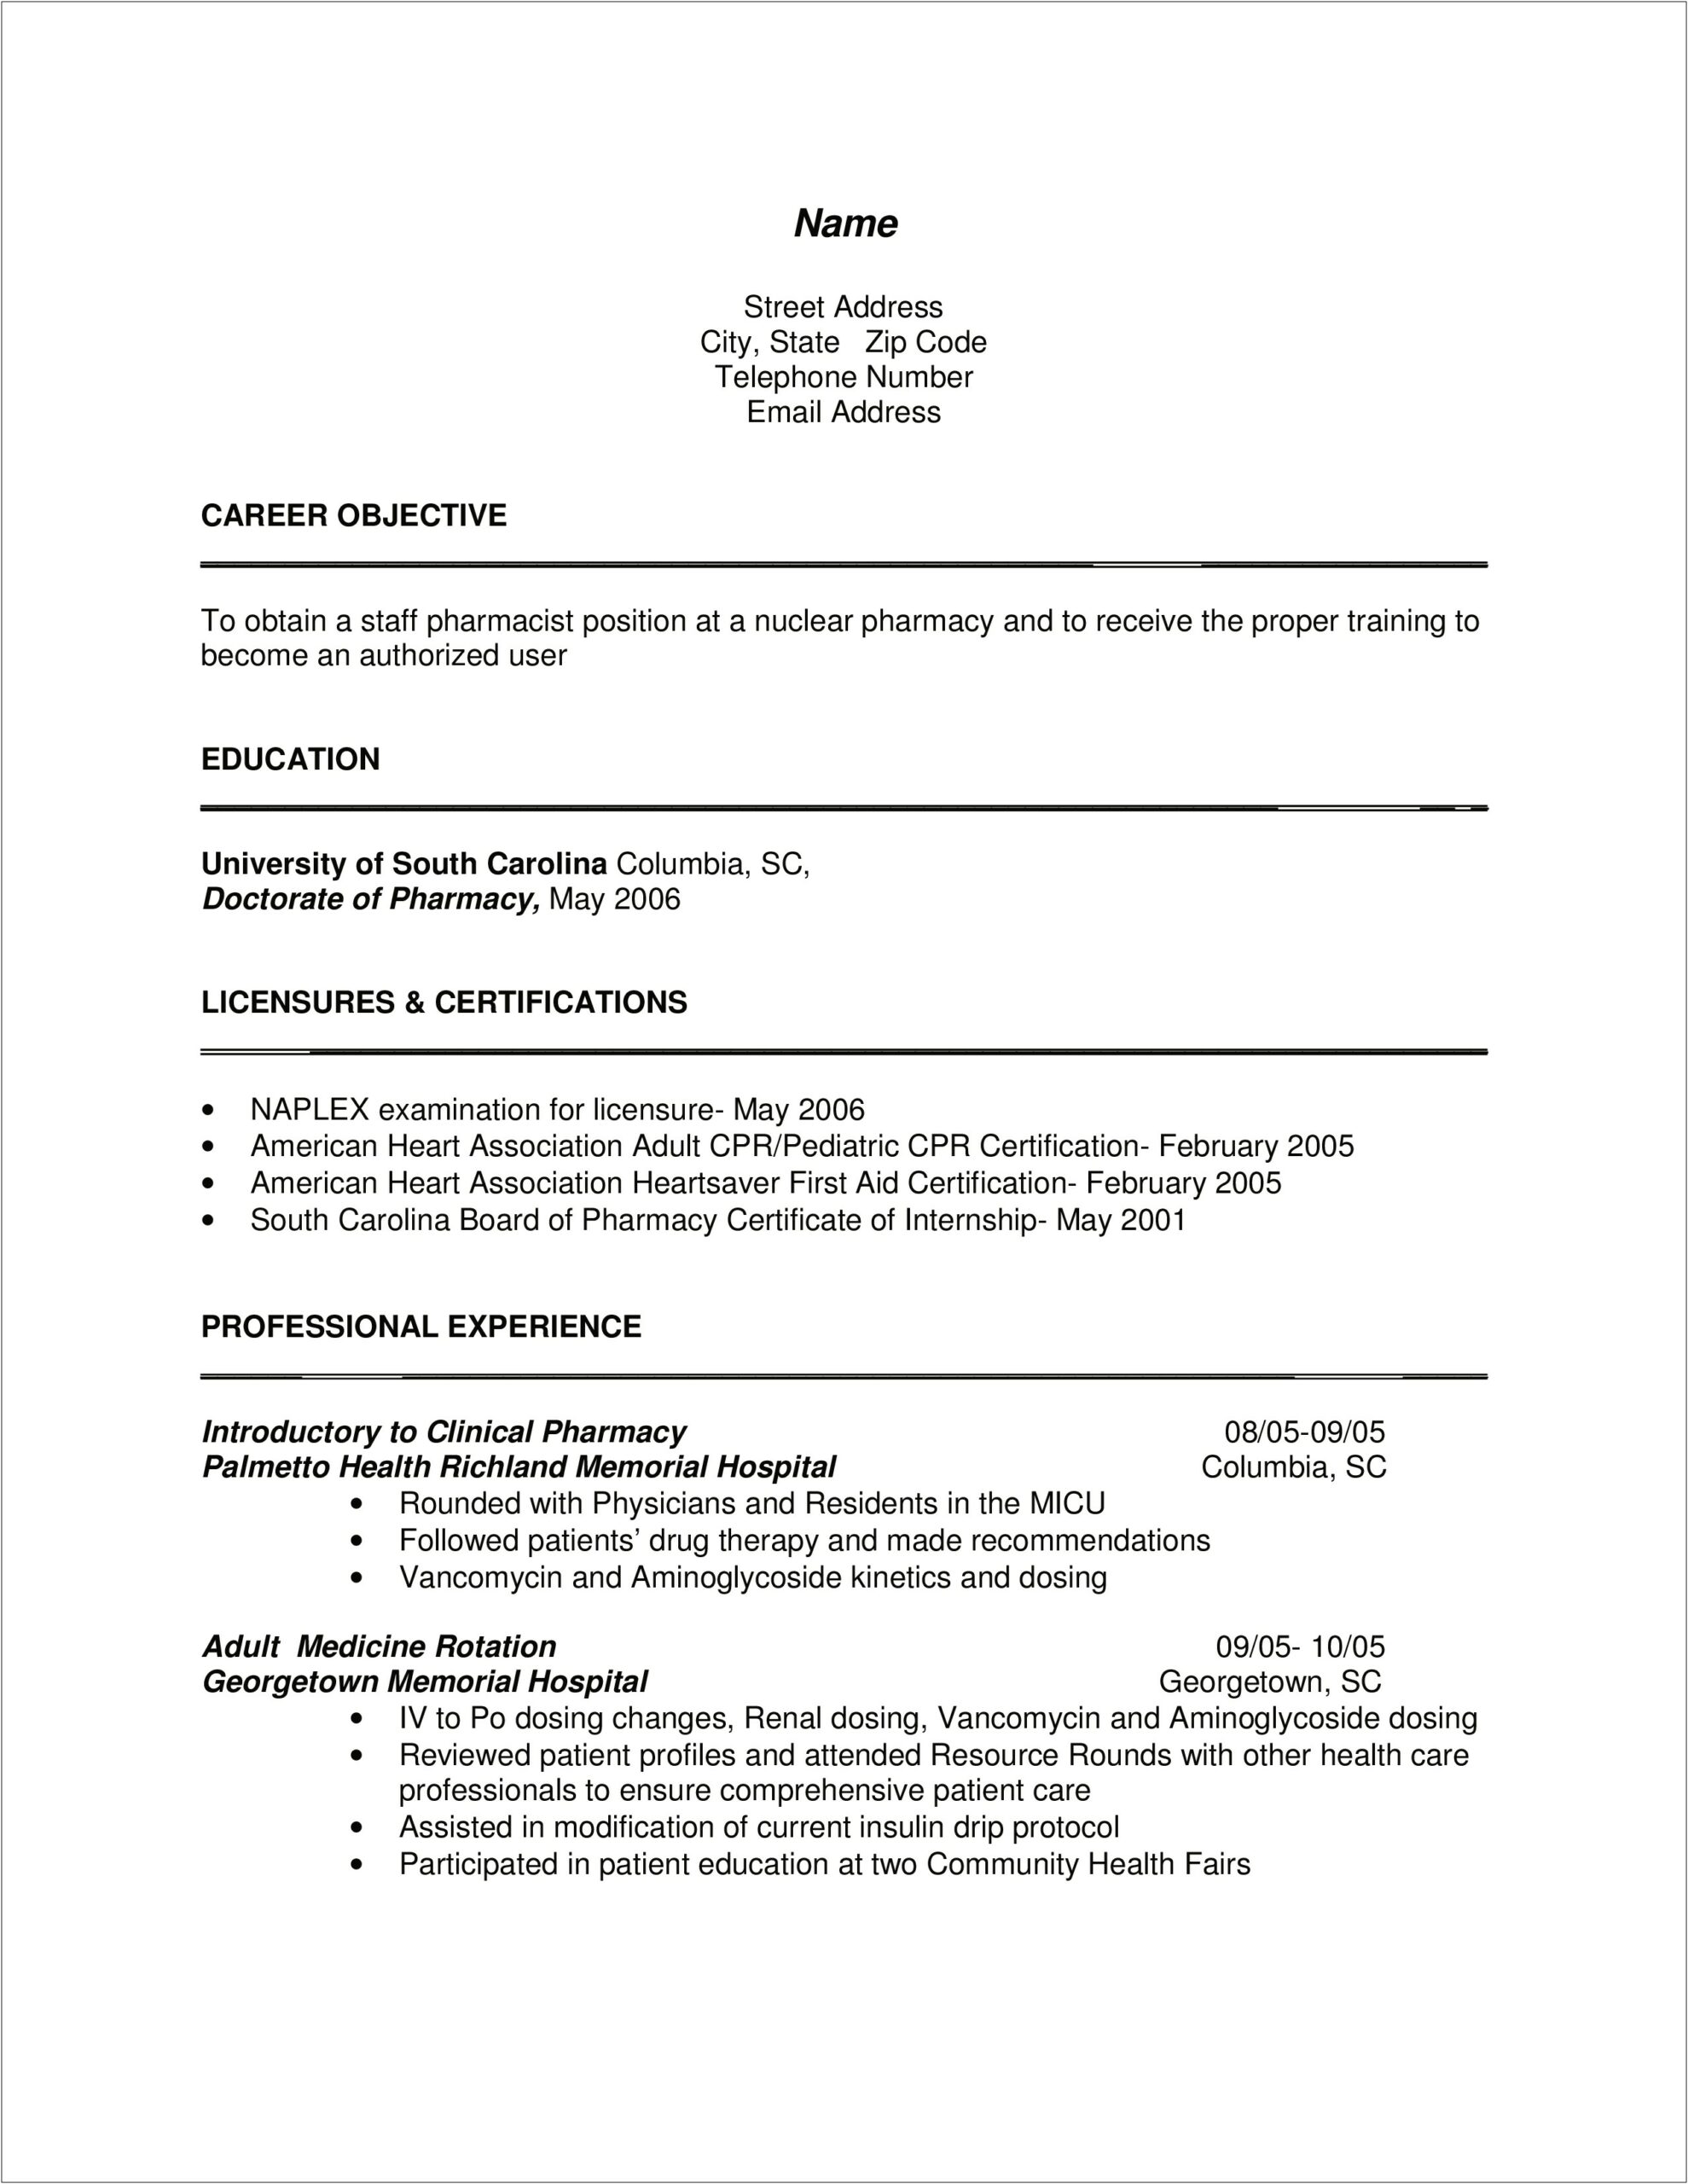 Resume Objective Examples For Pharmacist